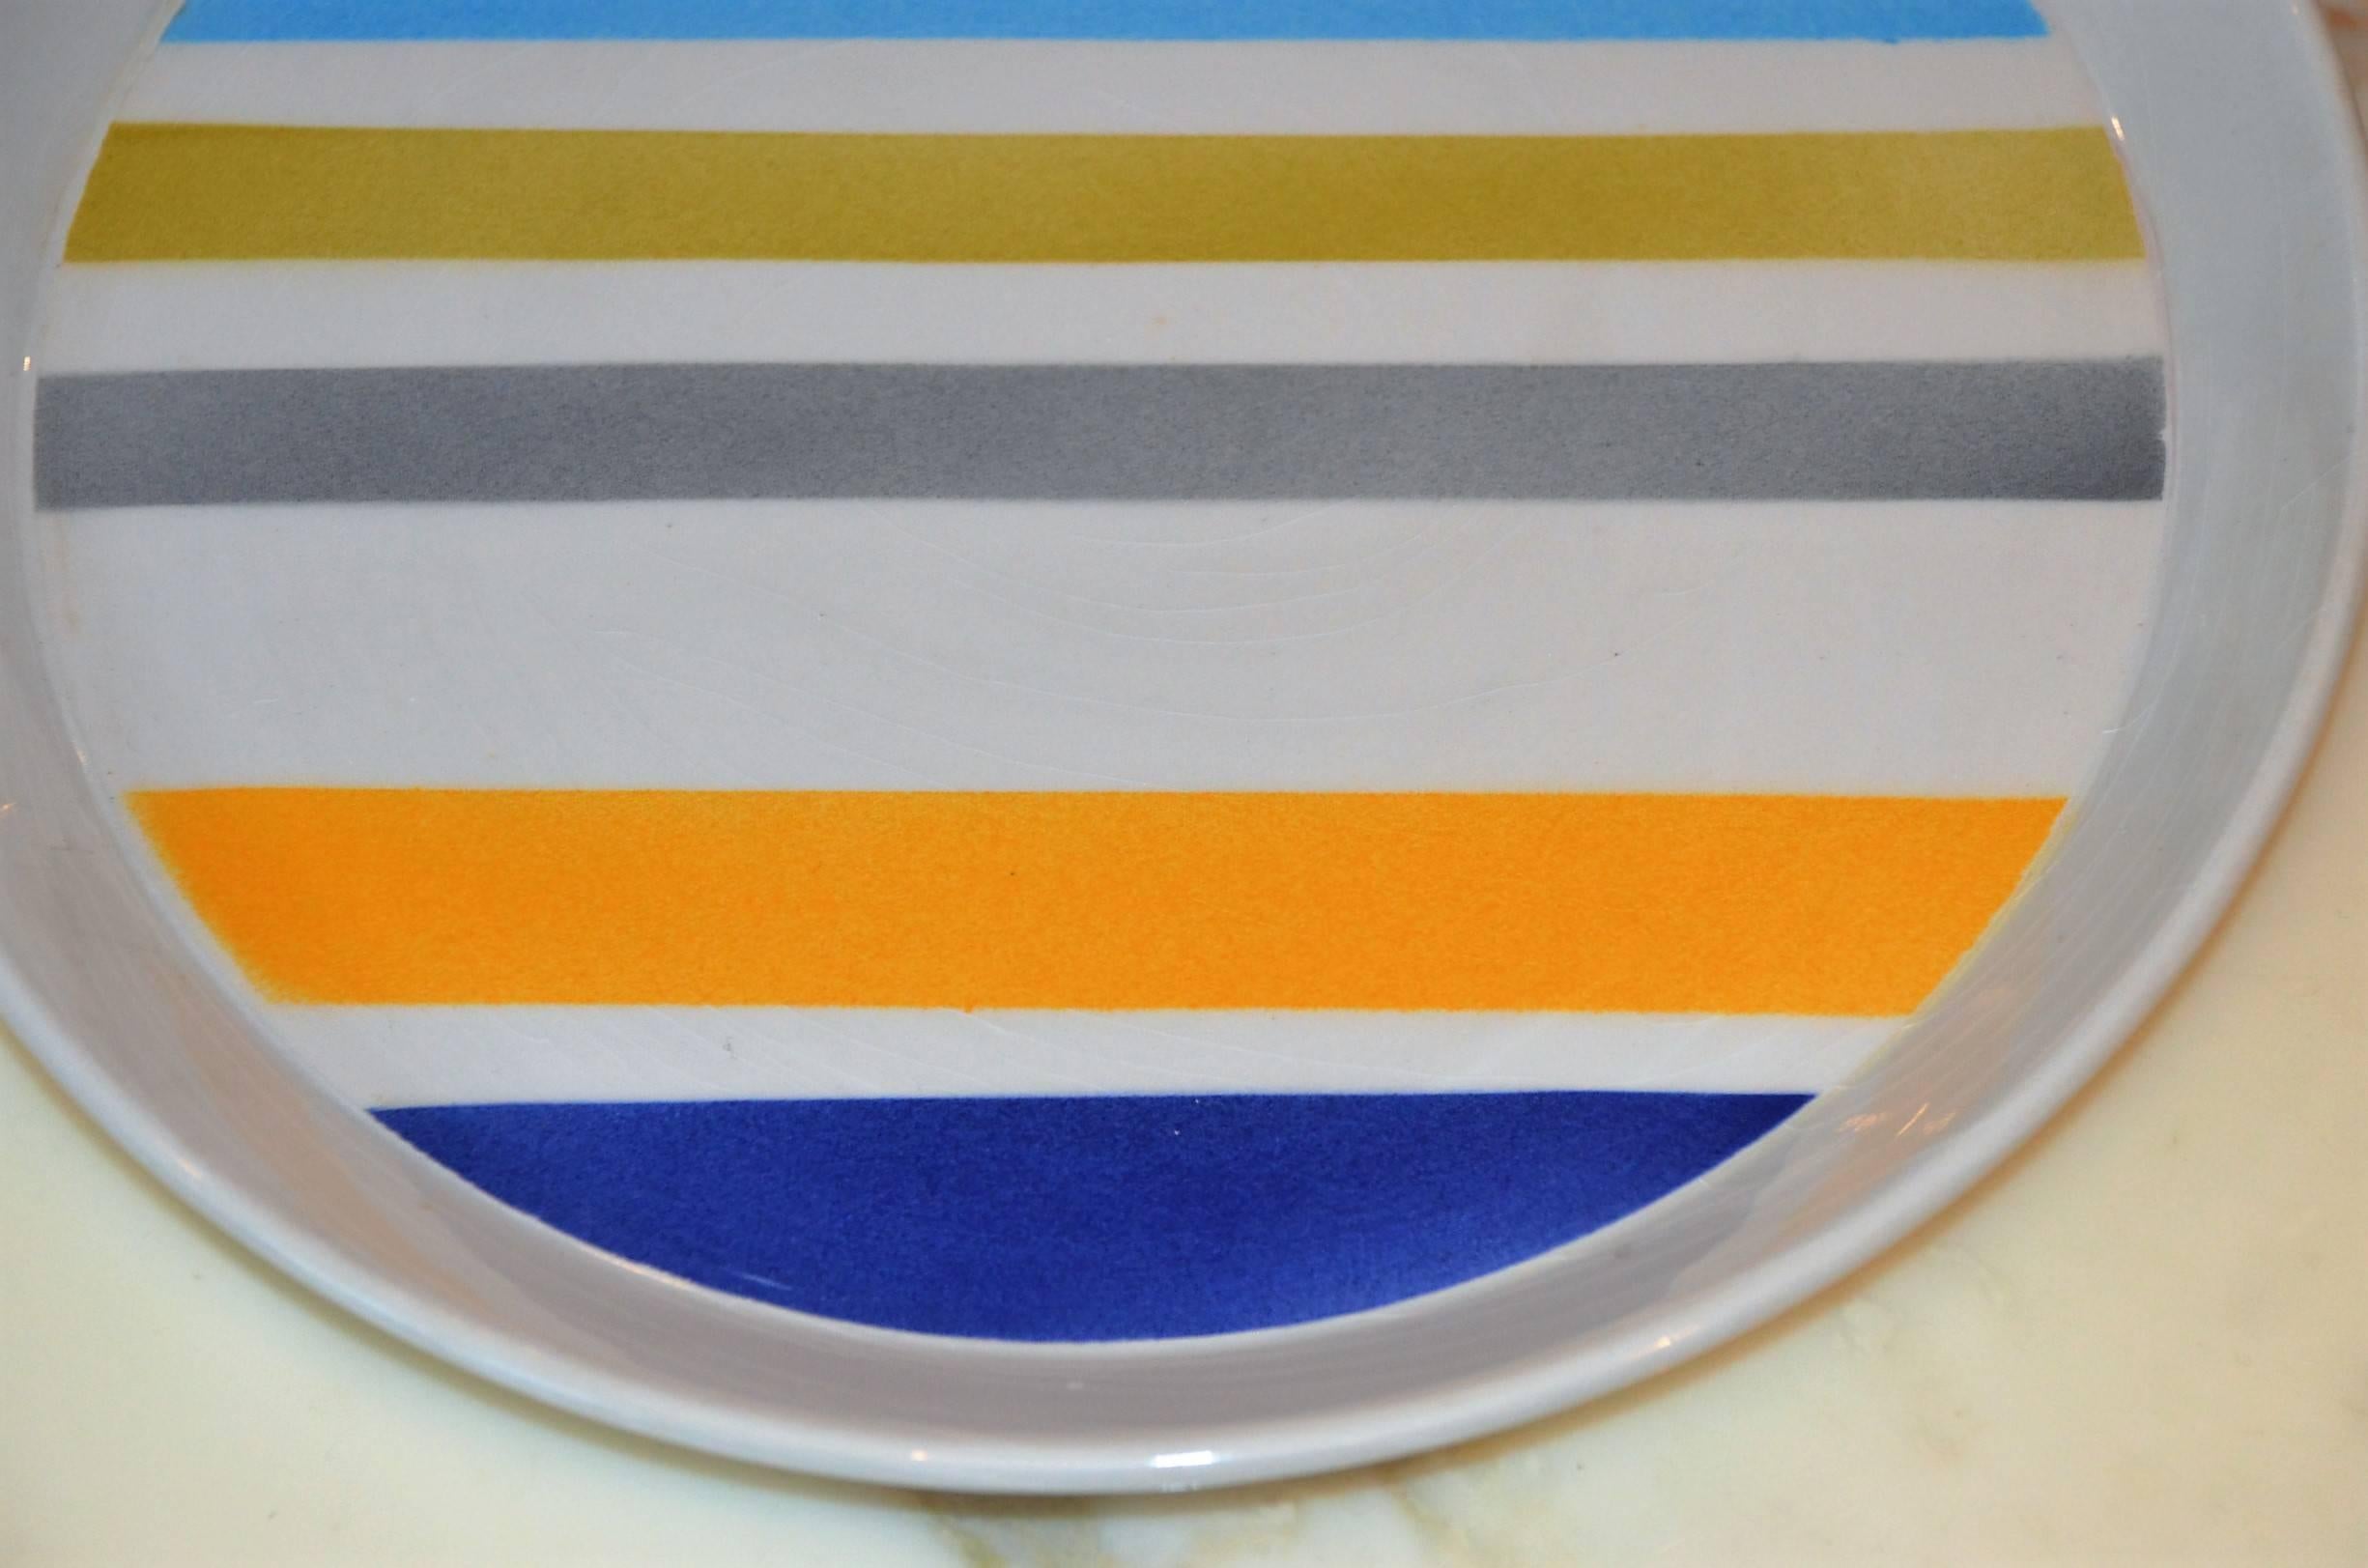 Italian Modernist Colorful Plate Designed by Gio Ponti, Italy, 1960s